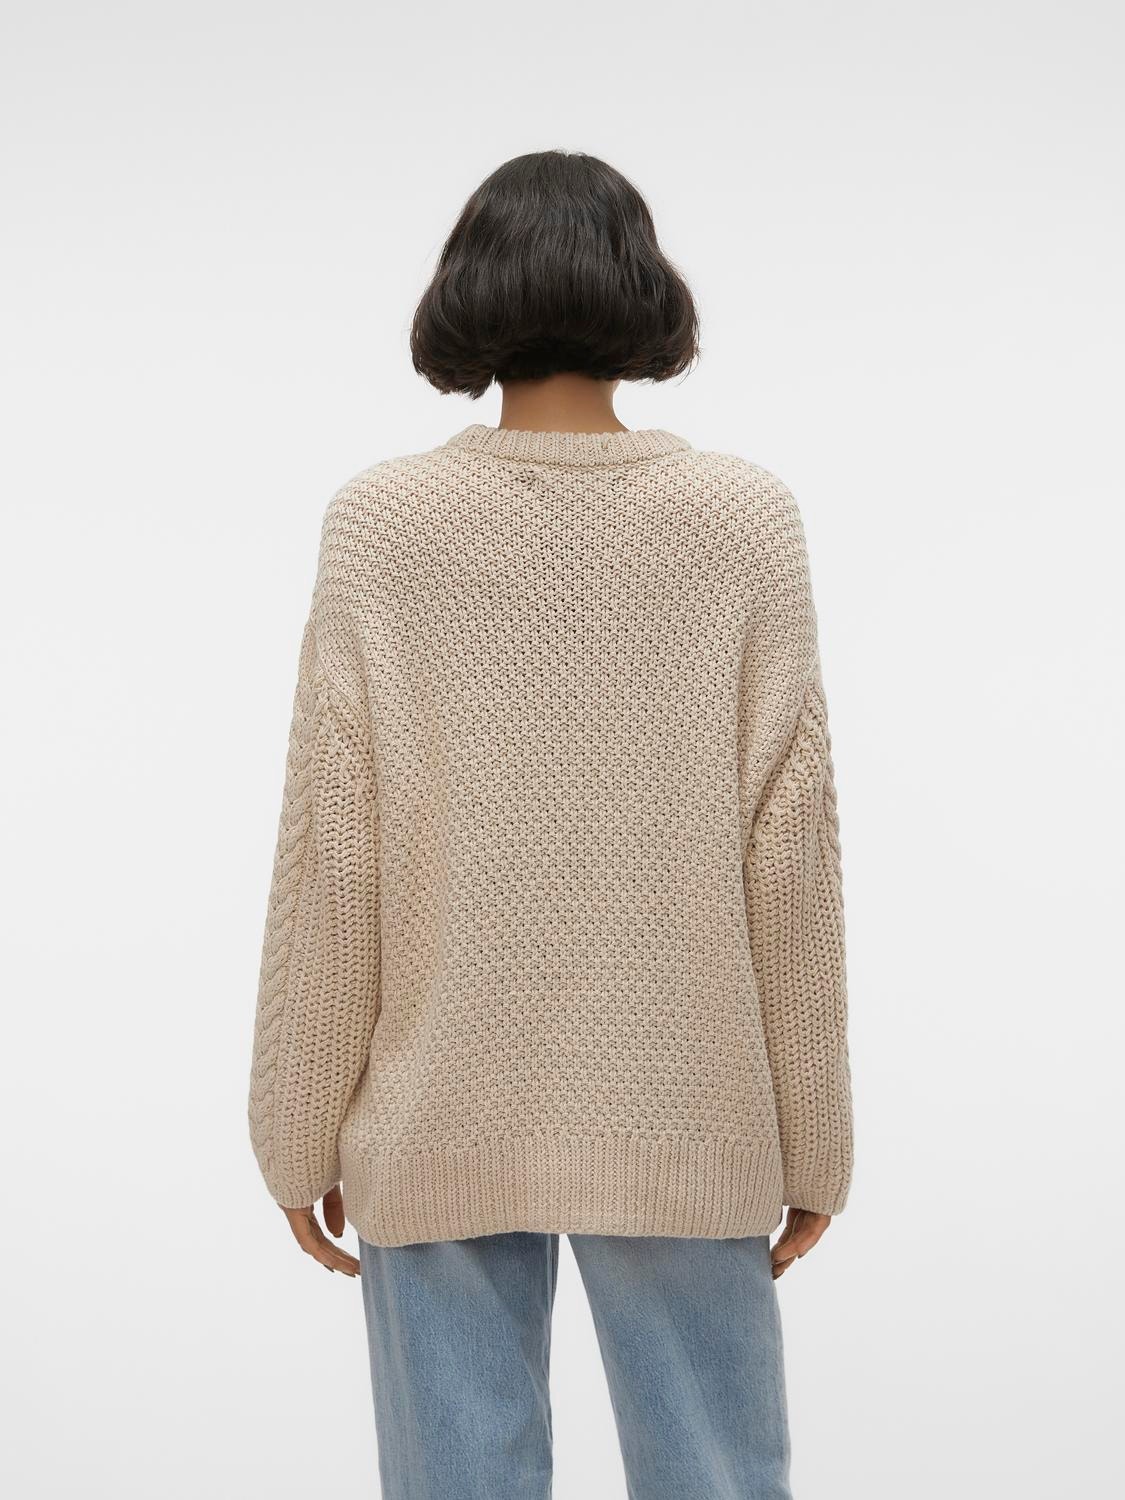 Vero Moda VMSVEACABLE Pull-overs -Oatmeal - 10308363